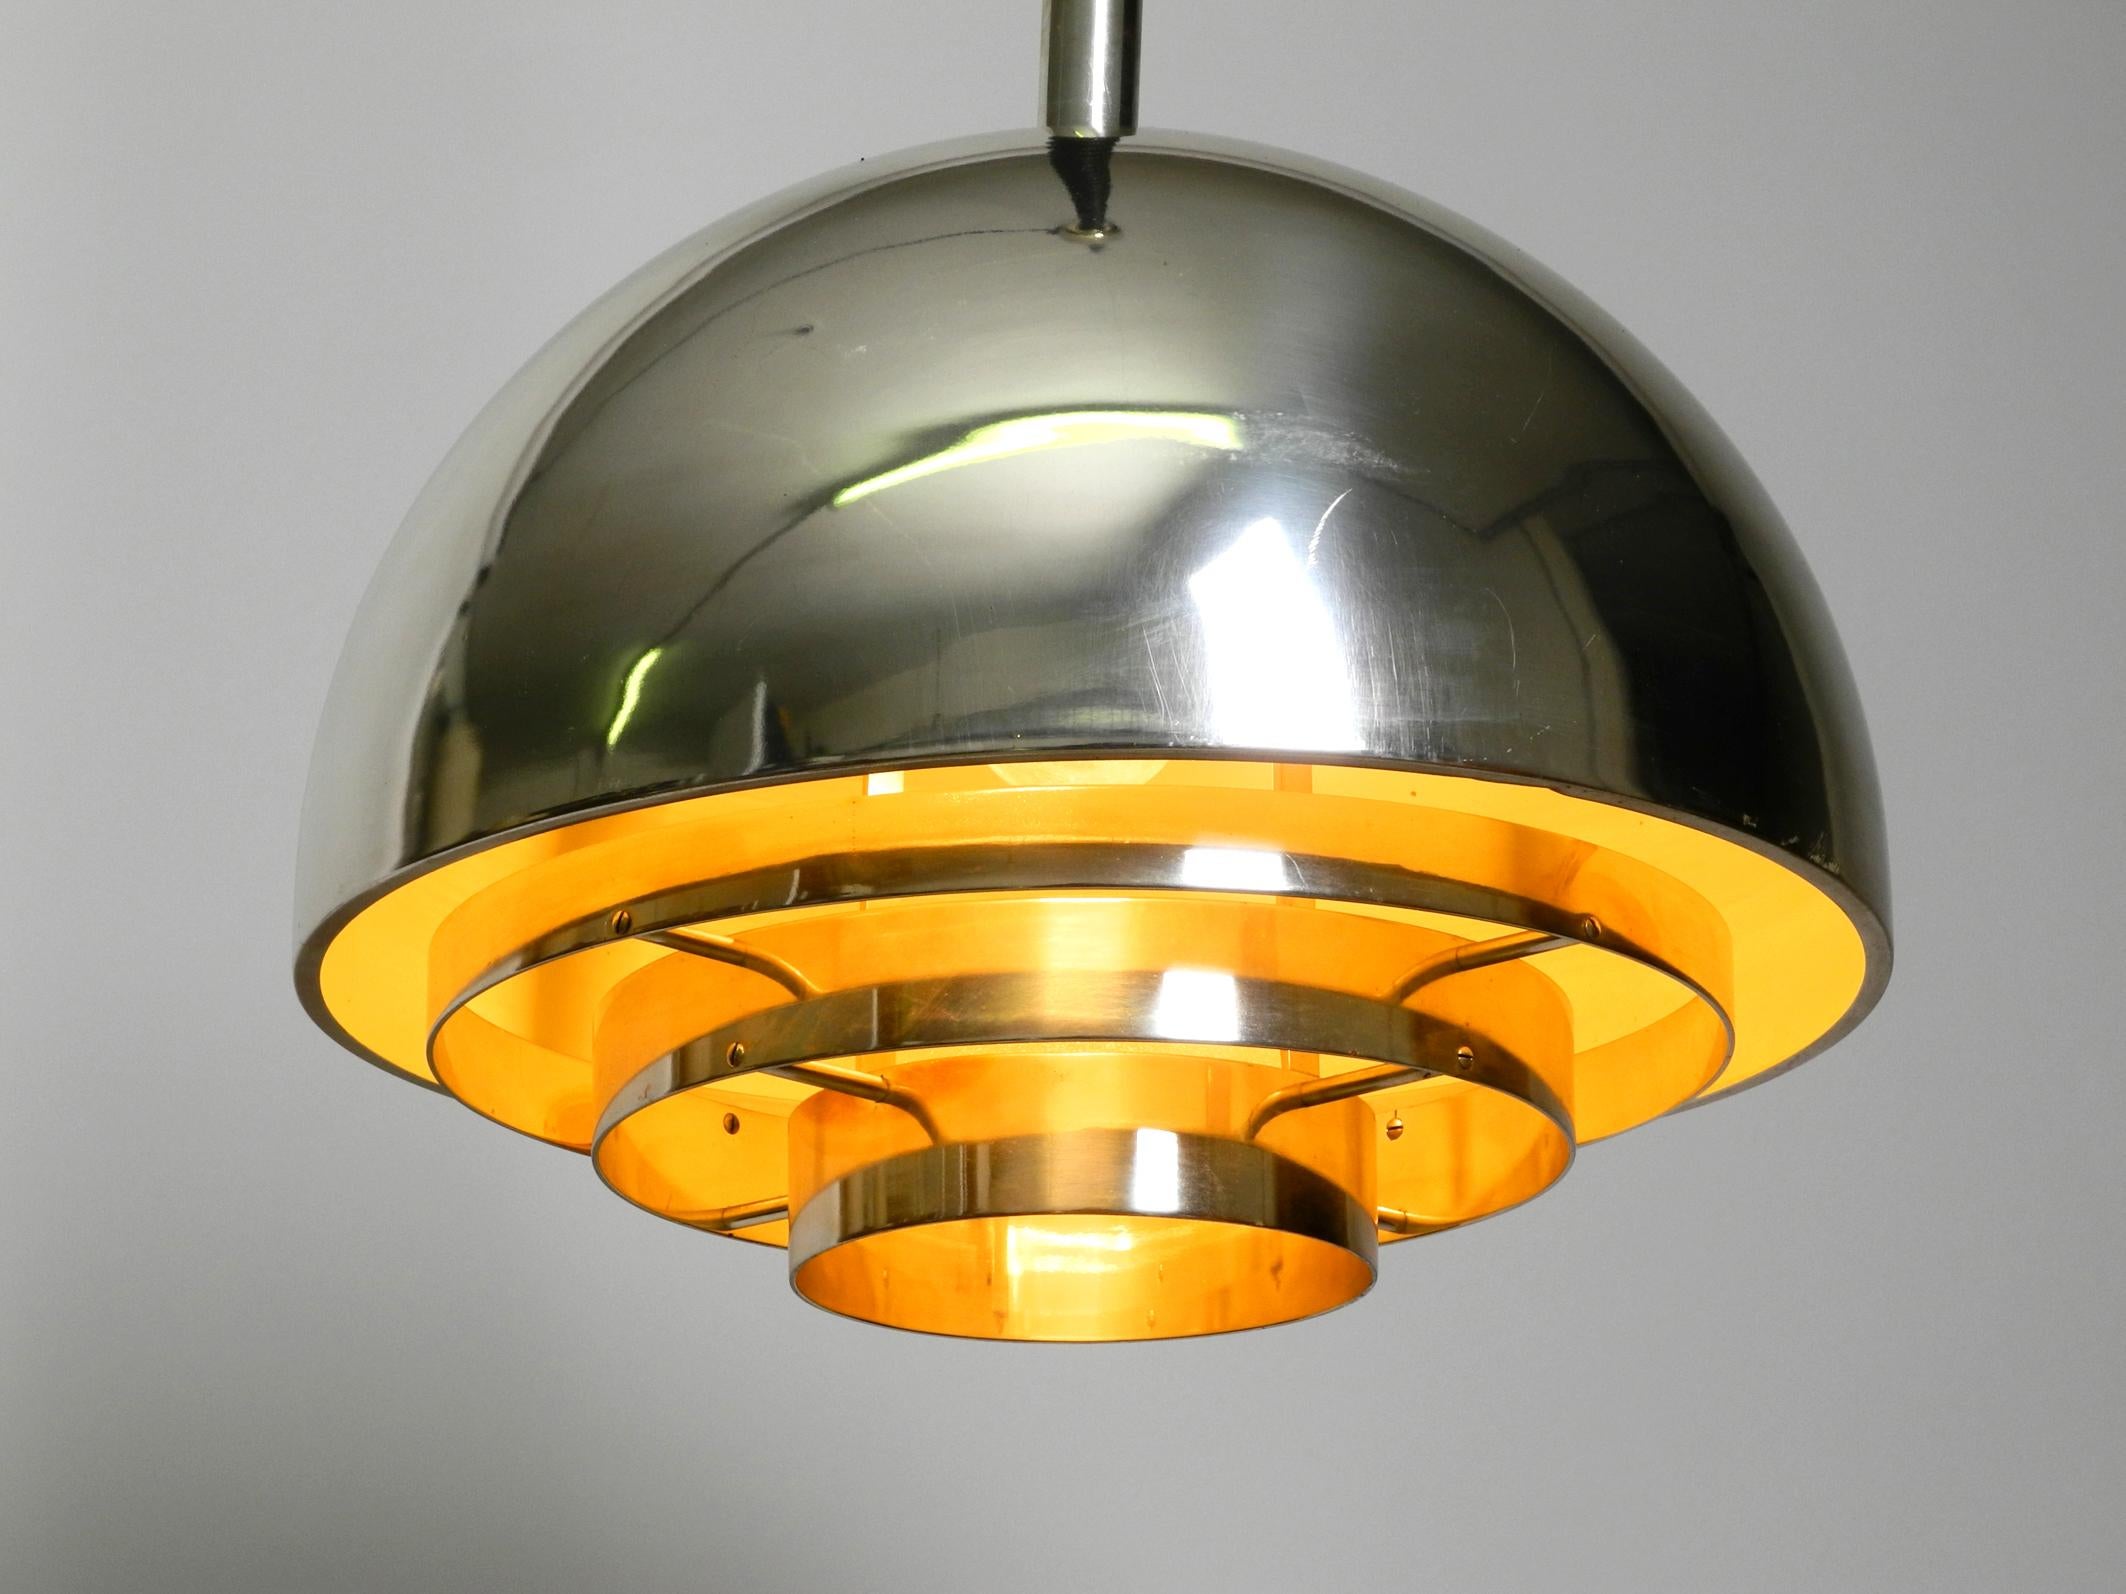 Beautiful and rare large mid century ceiling lamp by the Vereinigte Werkstätten.
Very nice mid century slat design with dome shape.
Heavy, high-quality, elegant workmanship made of solid metal and silver-plated shade and canopy.
The lamp is